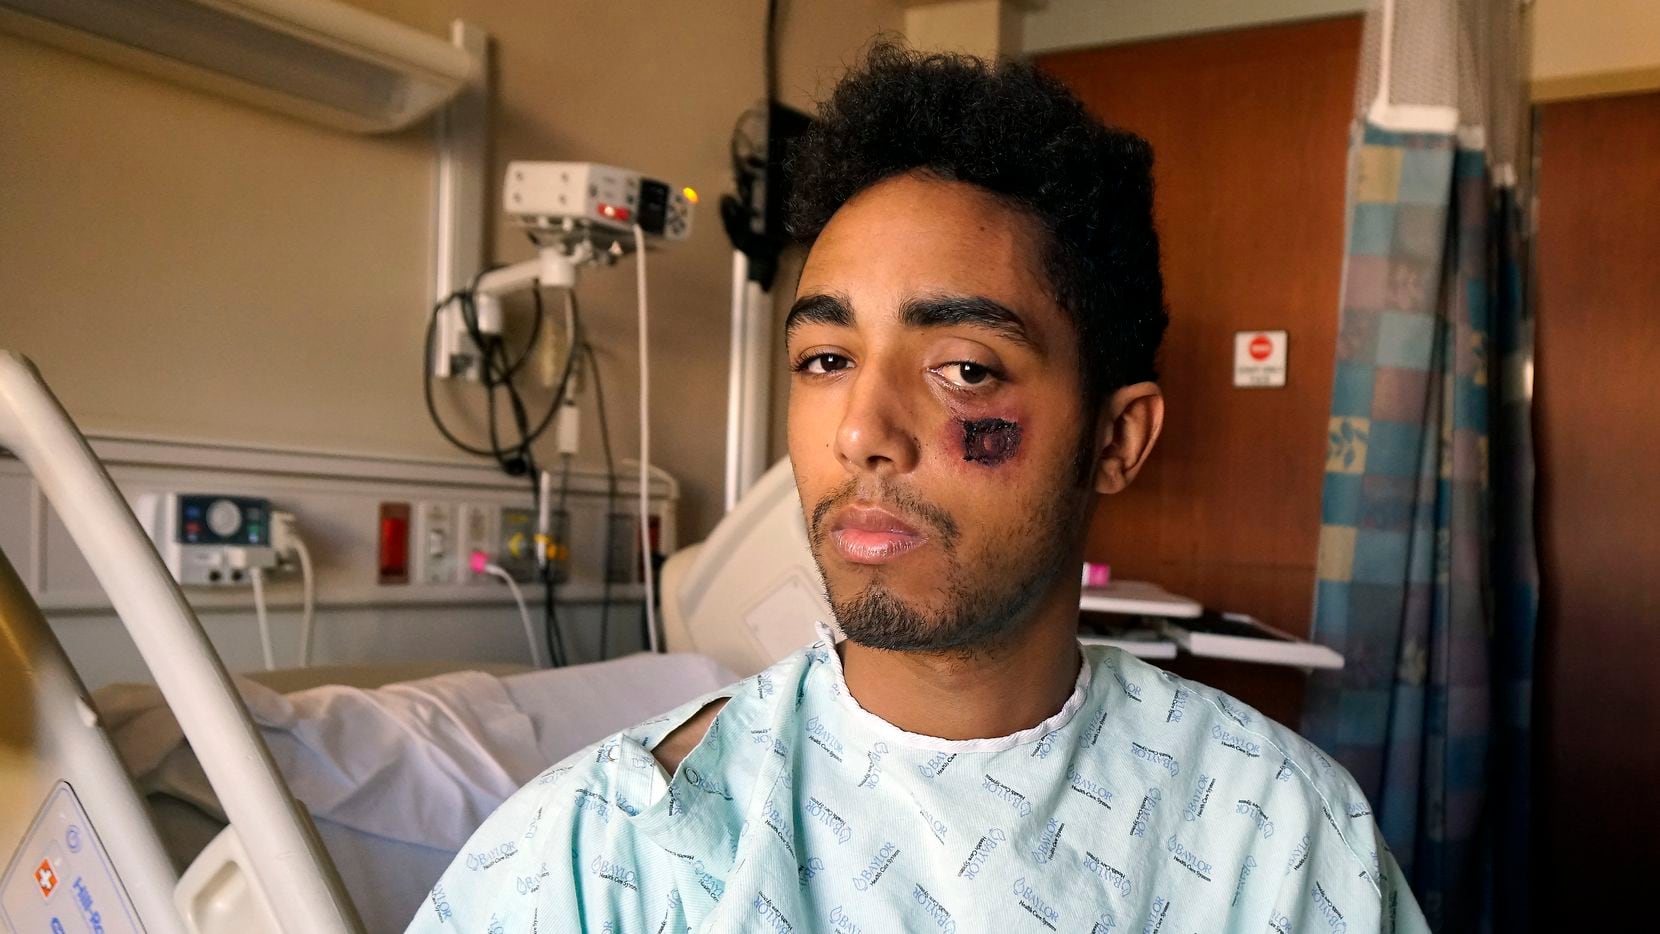 Vincent Doyle said he was struck by a so-called less lethal bullet during a May 30 protest in downtown Dallas. The 21-year-old Frisco resident recovered at an area hospital. (Lawrence Jenkins/Special Contributor)